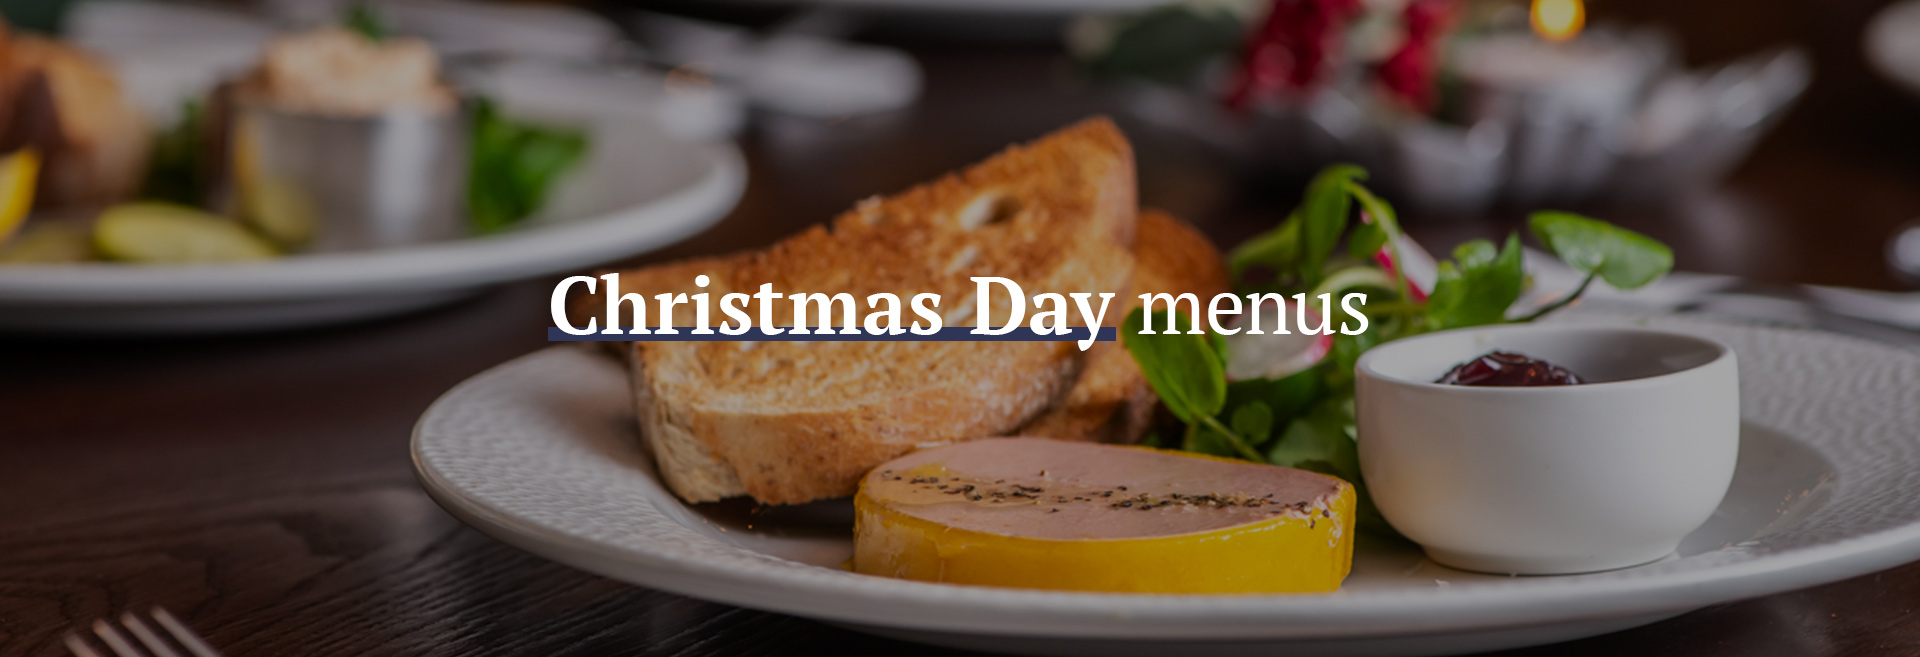 Christmas Day Menu at The Rose and Thistle